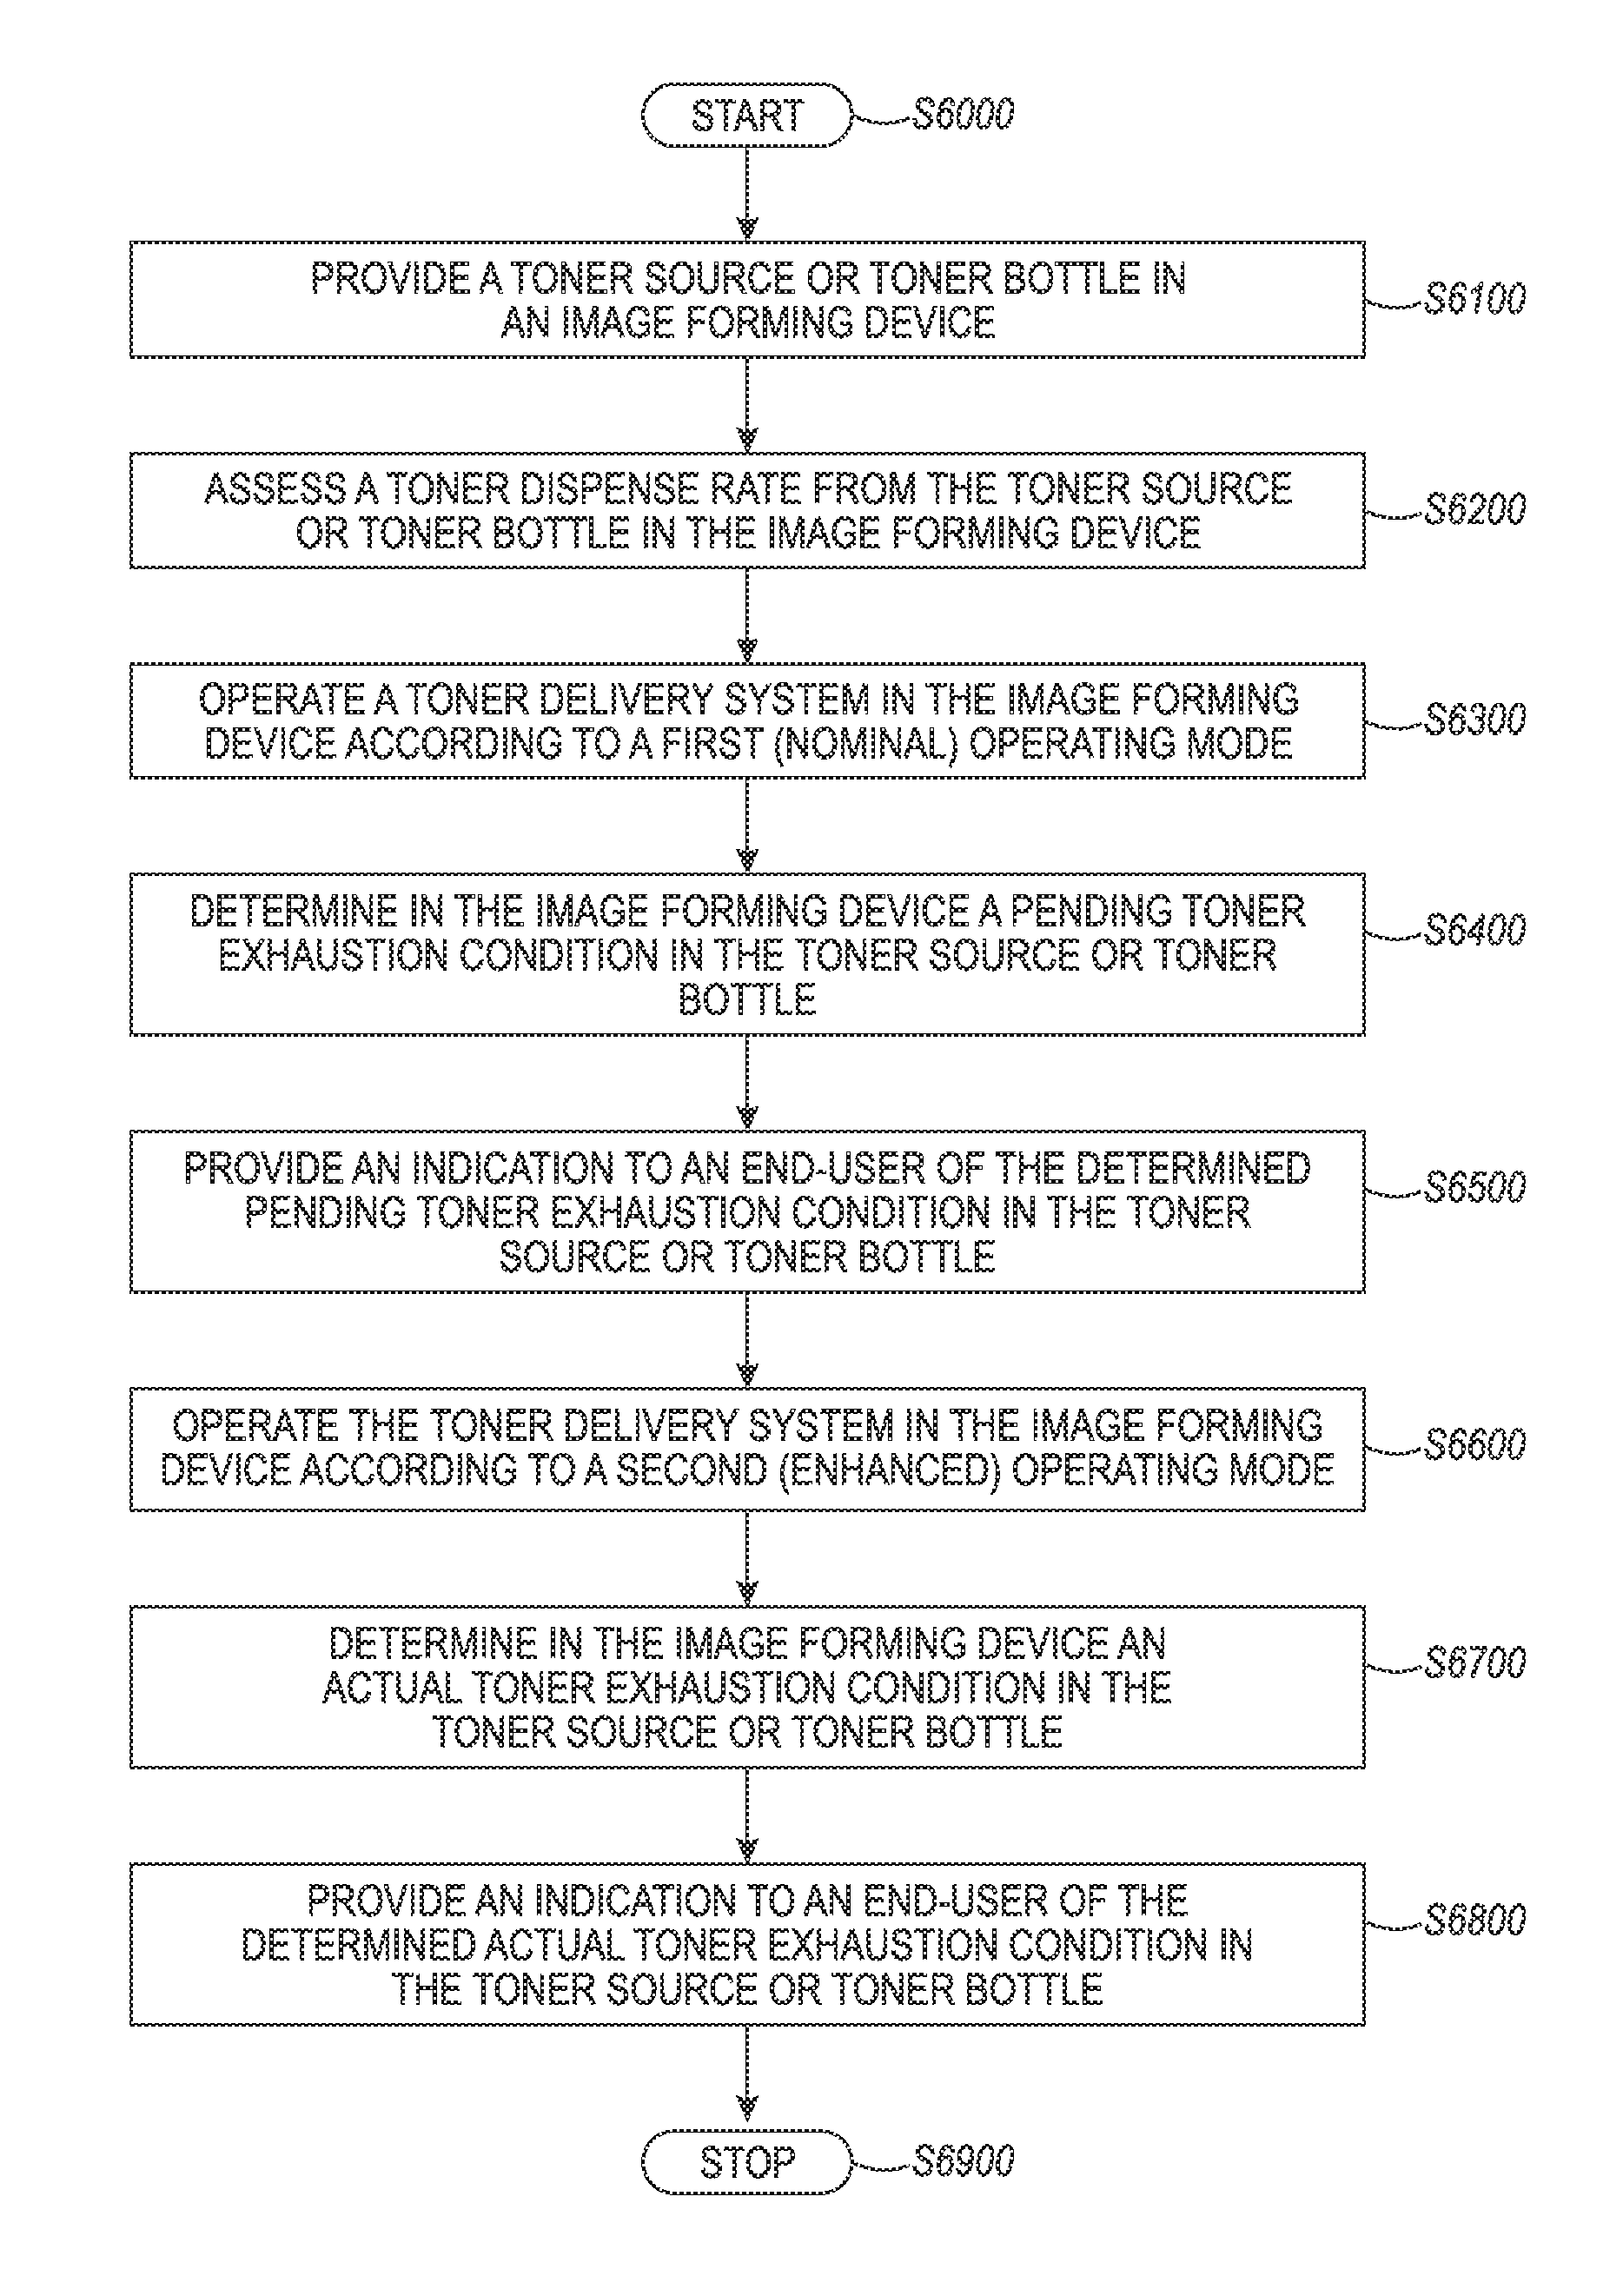 Systems and methods for implementing advanced toner dispensing and emptying of toner cartridge components in image forming devices